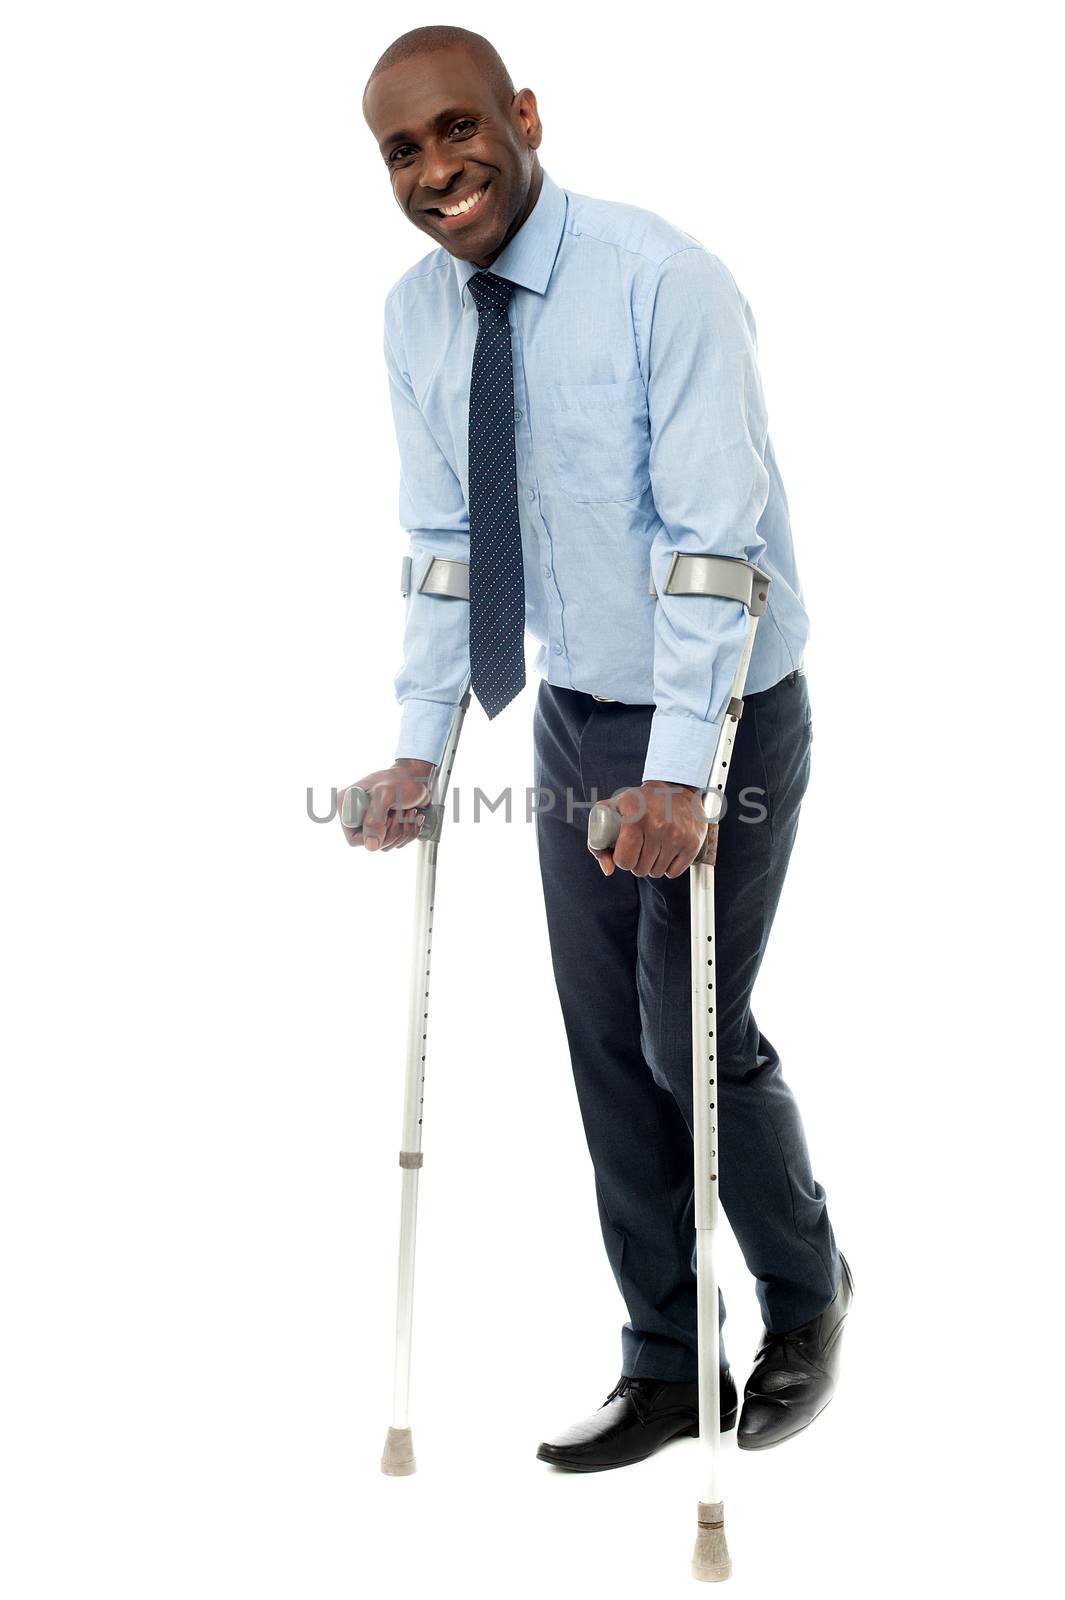 Smiling businessman trying to walk with crutches 